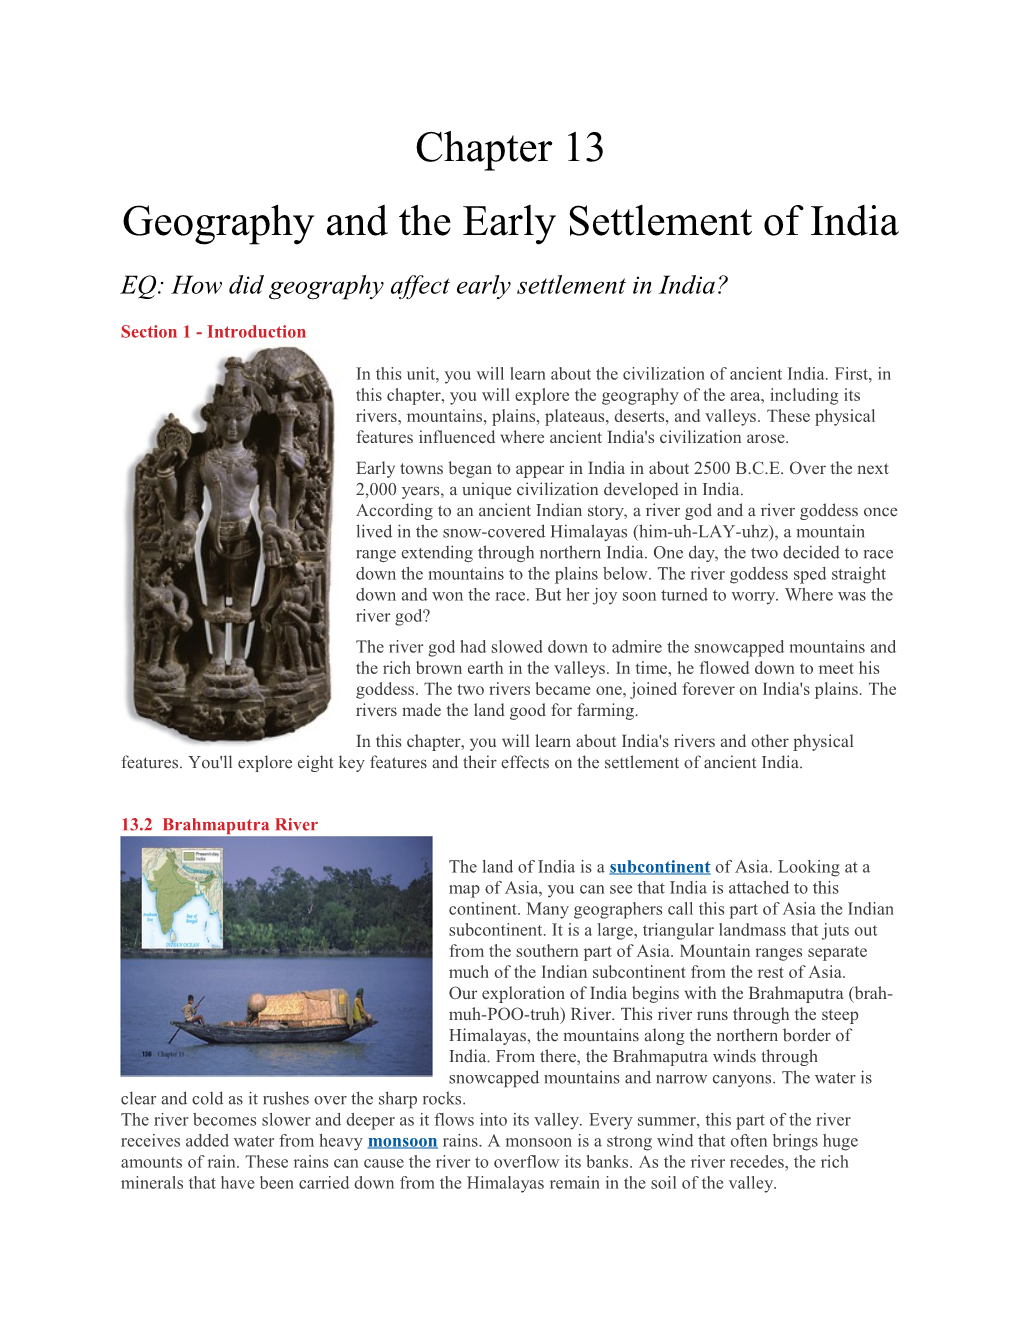 Geography and the Early Settlement of India